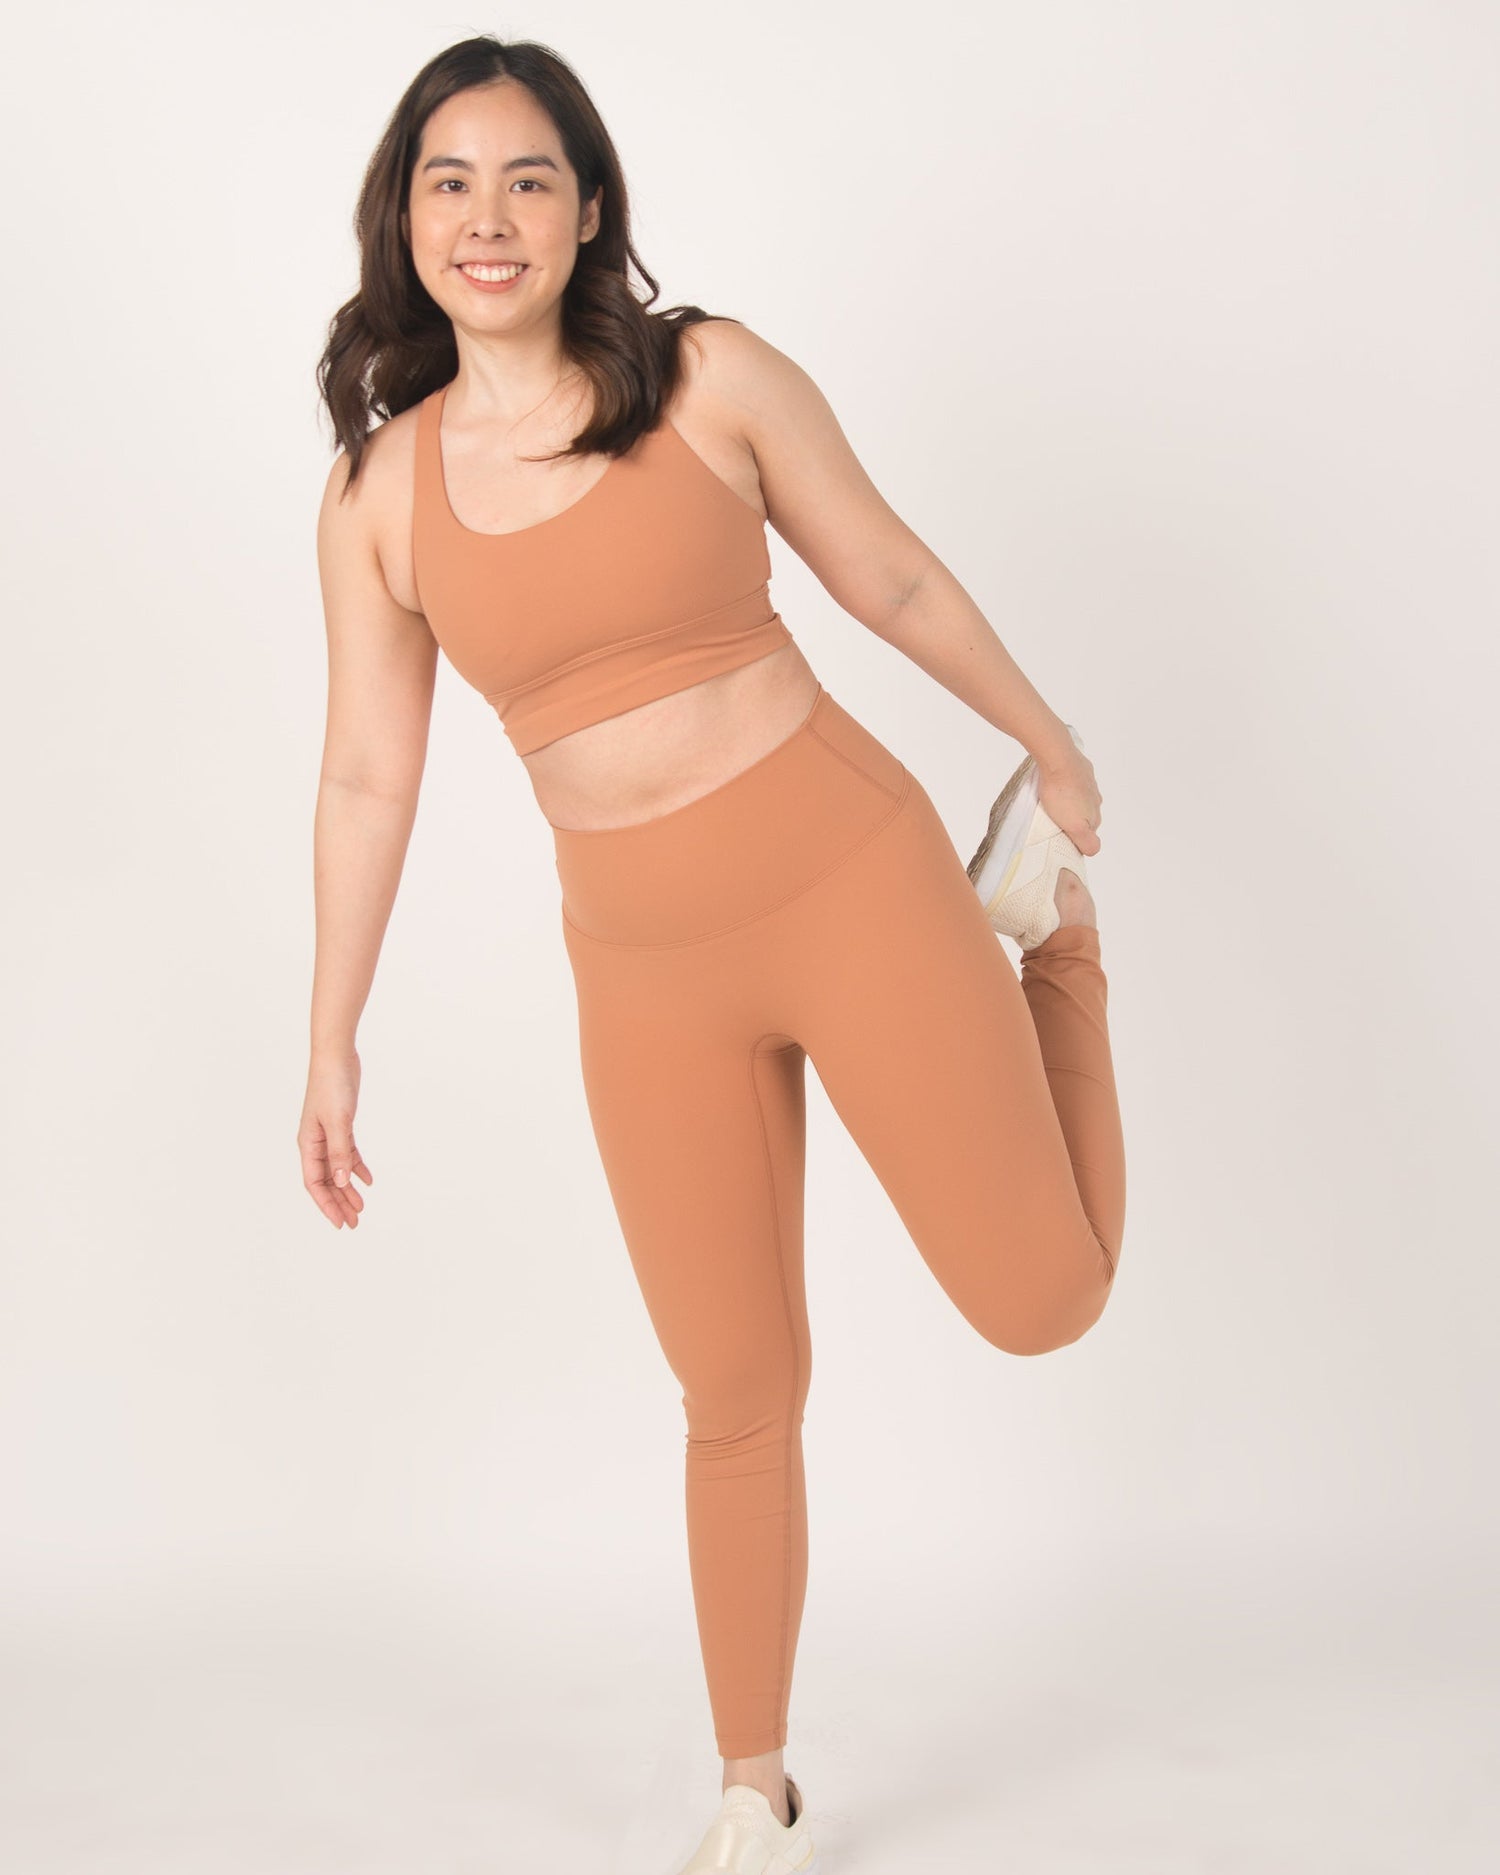 Feel good leggings in Spice - New Day Activewear